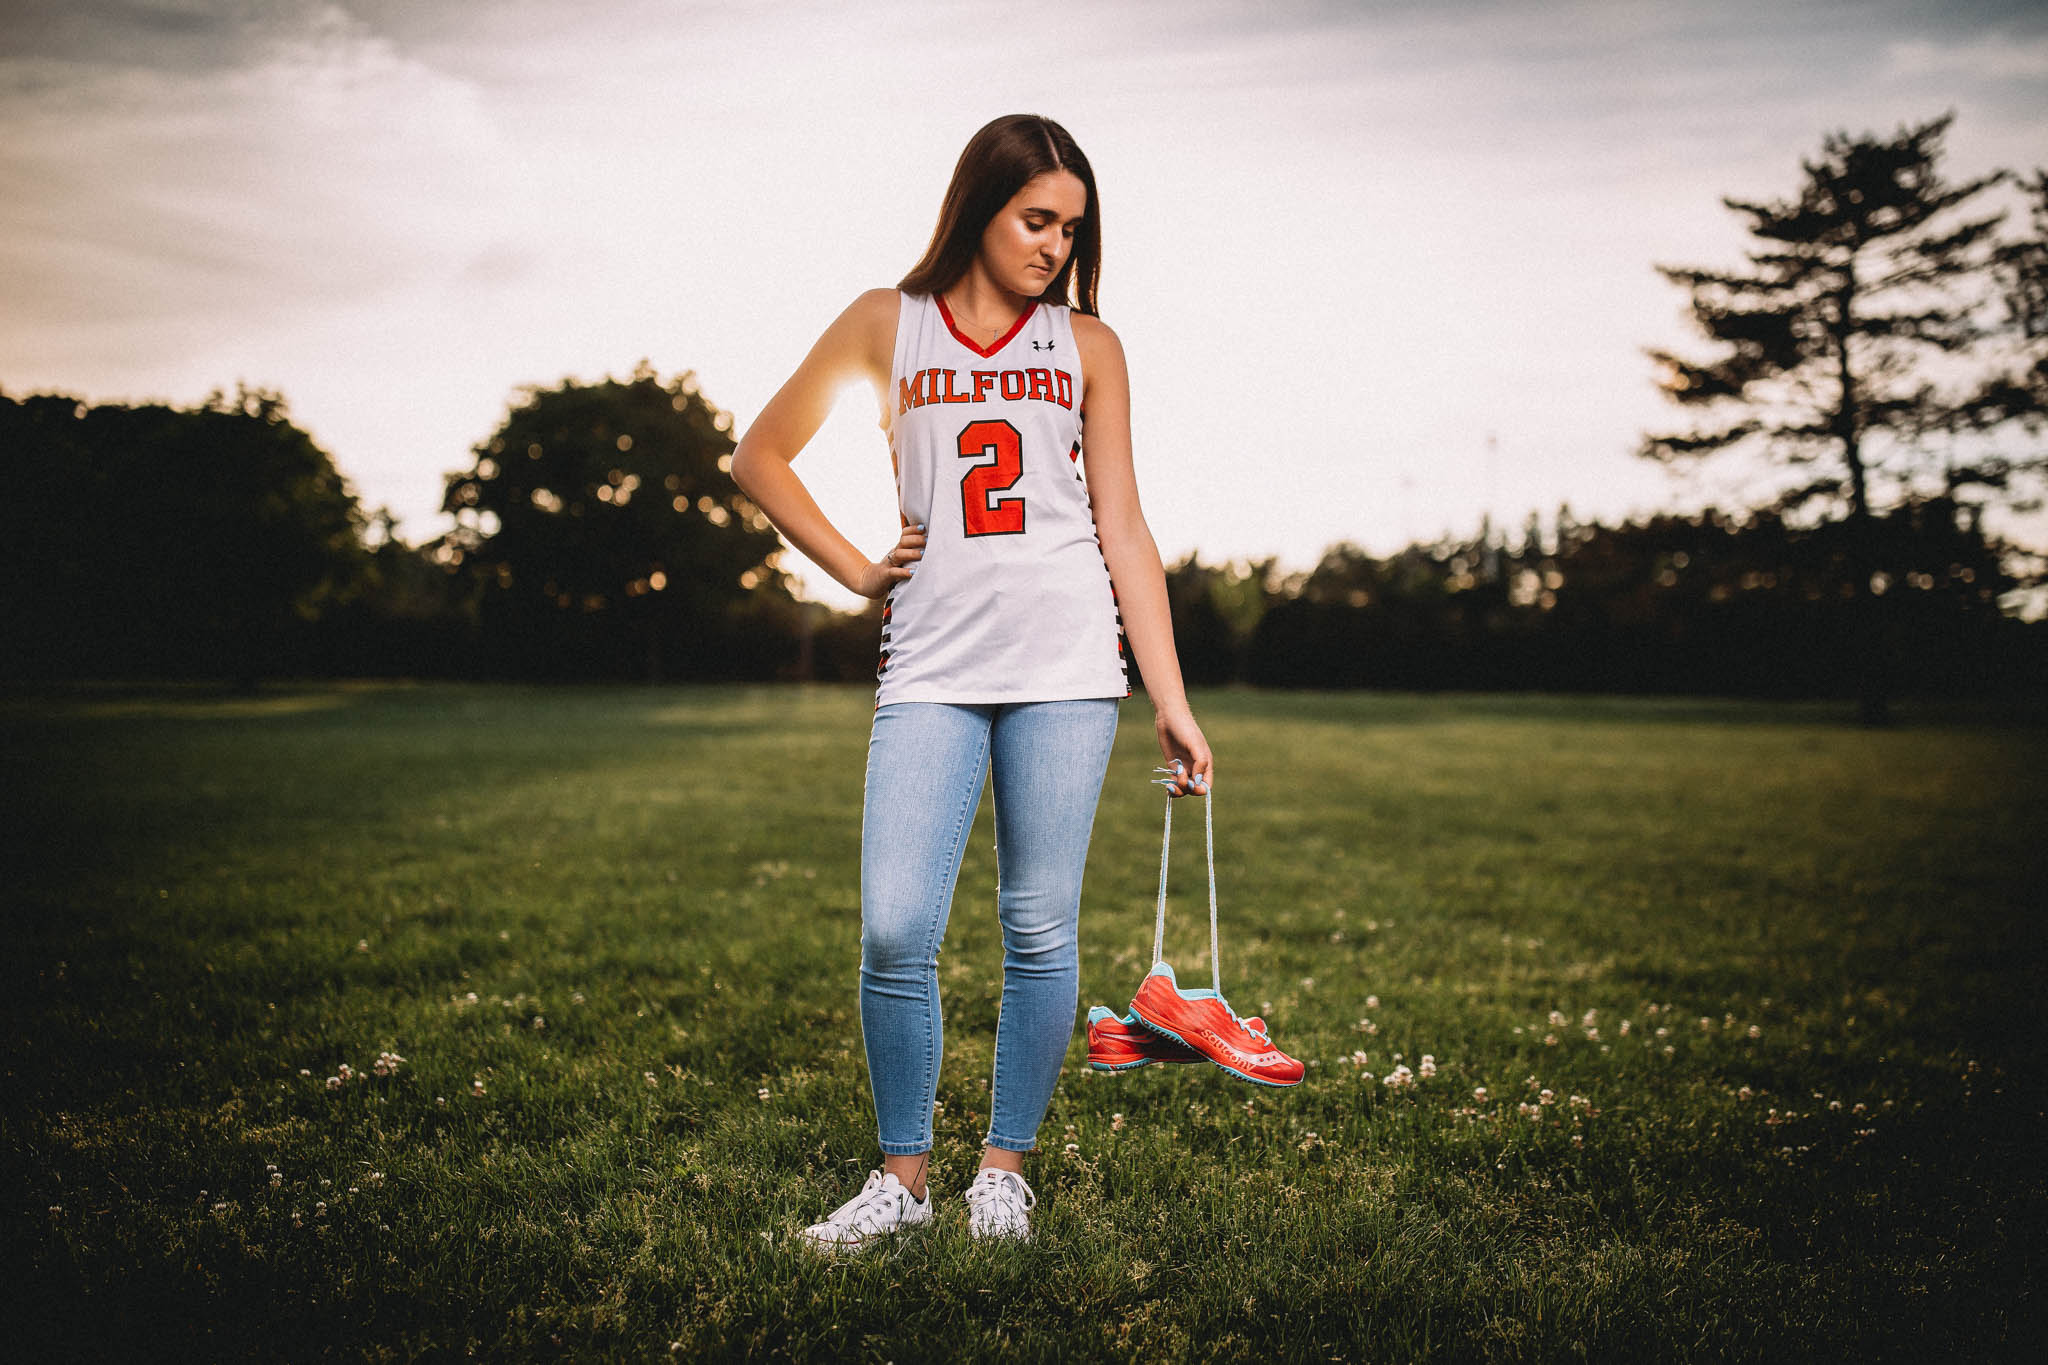 High school senior portrait of a young woman wearing a Milford jersey and holding running shoes standing in a field in Massachusetts at sunset